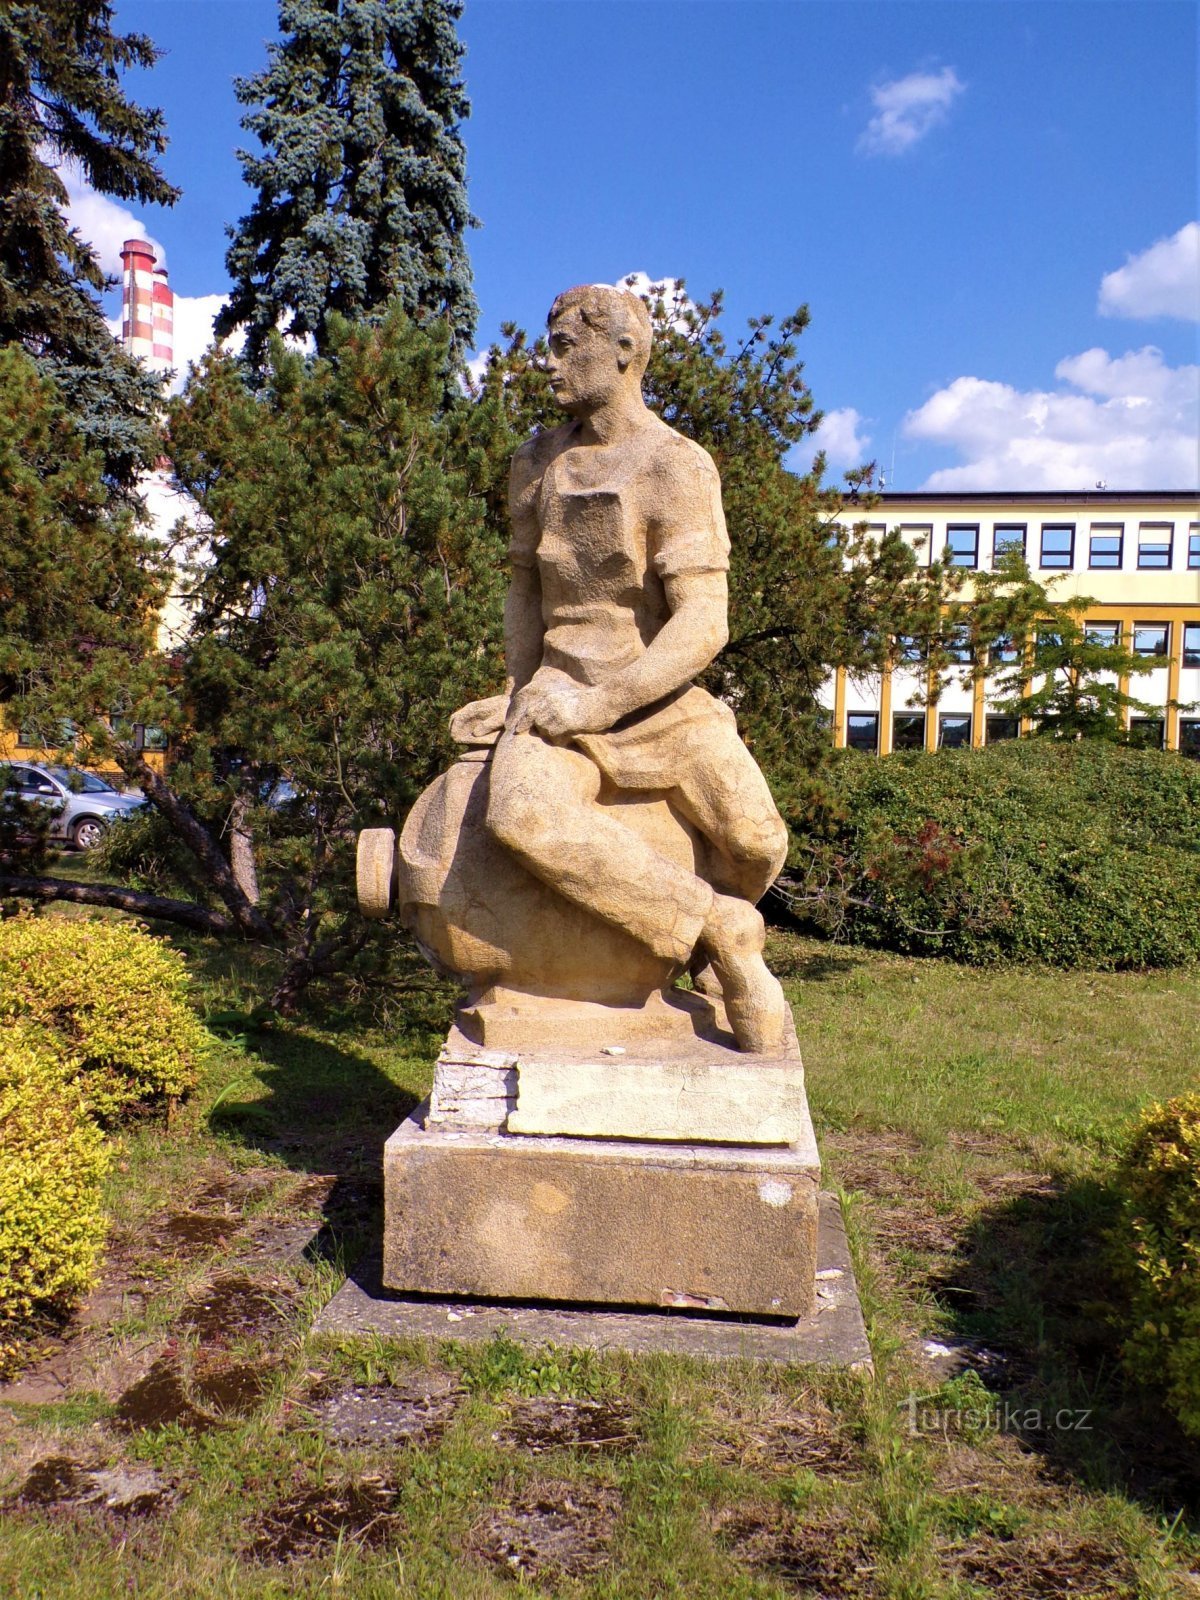 Statue in front of Opatovice nad Labem Power Station (September 29.9.2017, XNUMX)